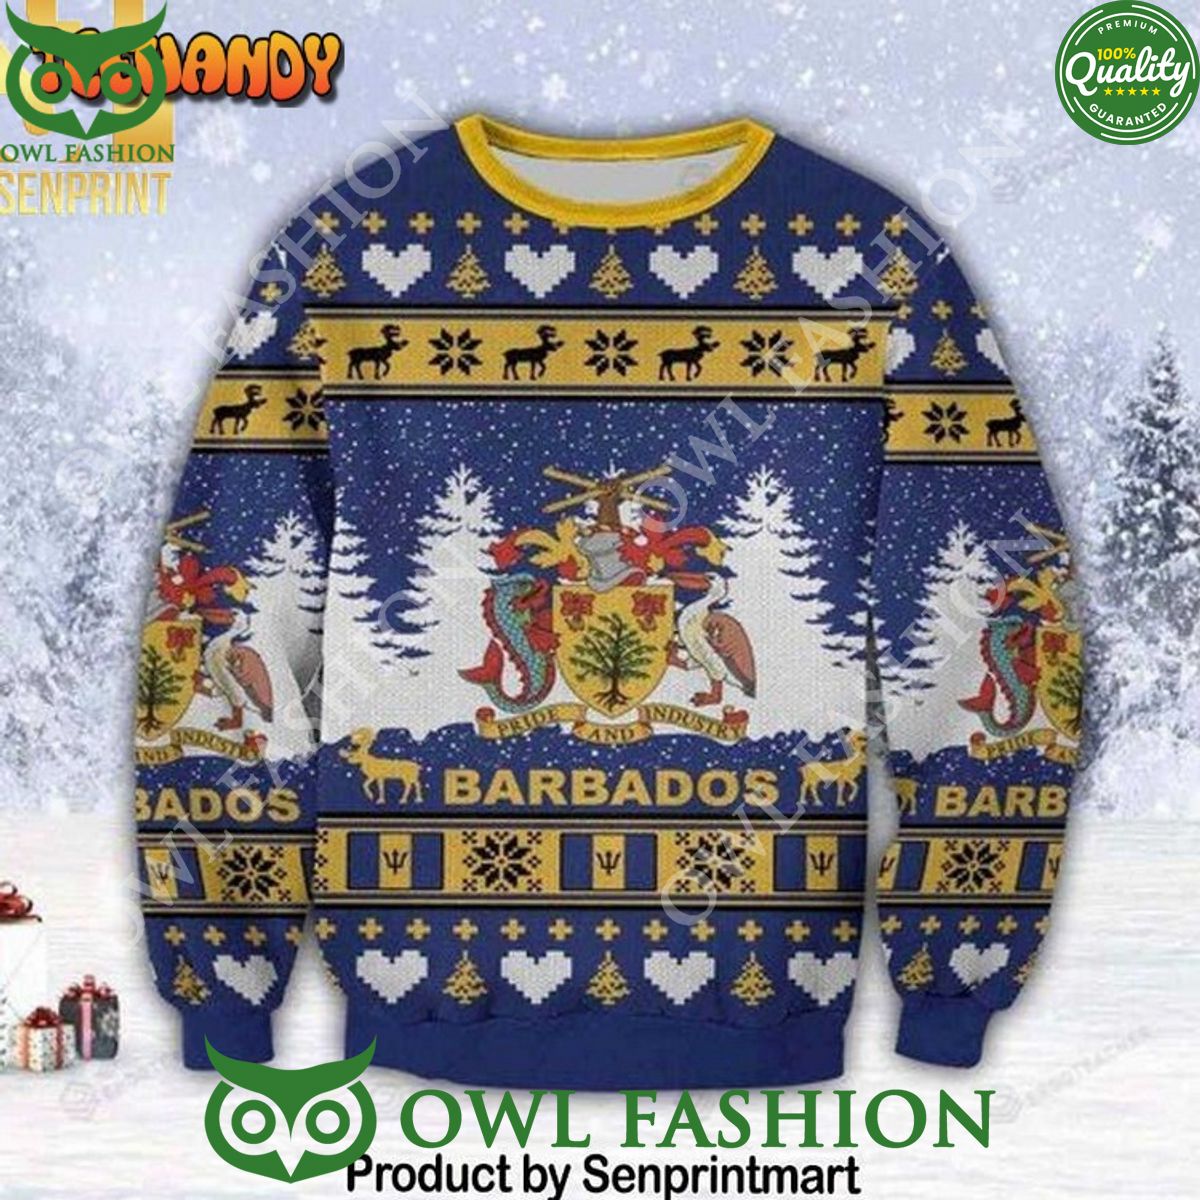 Barbados Island Pride and Industry For Christmas Sweater